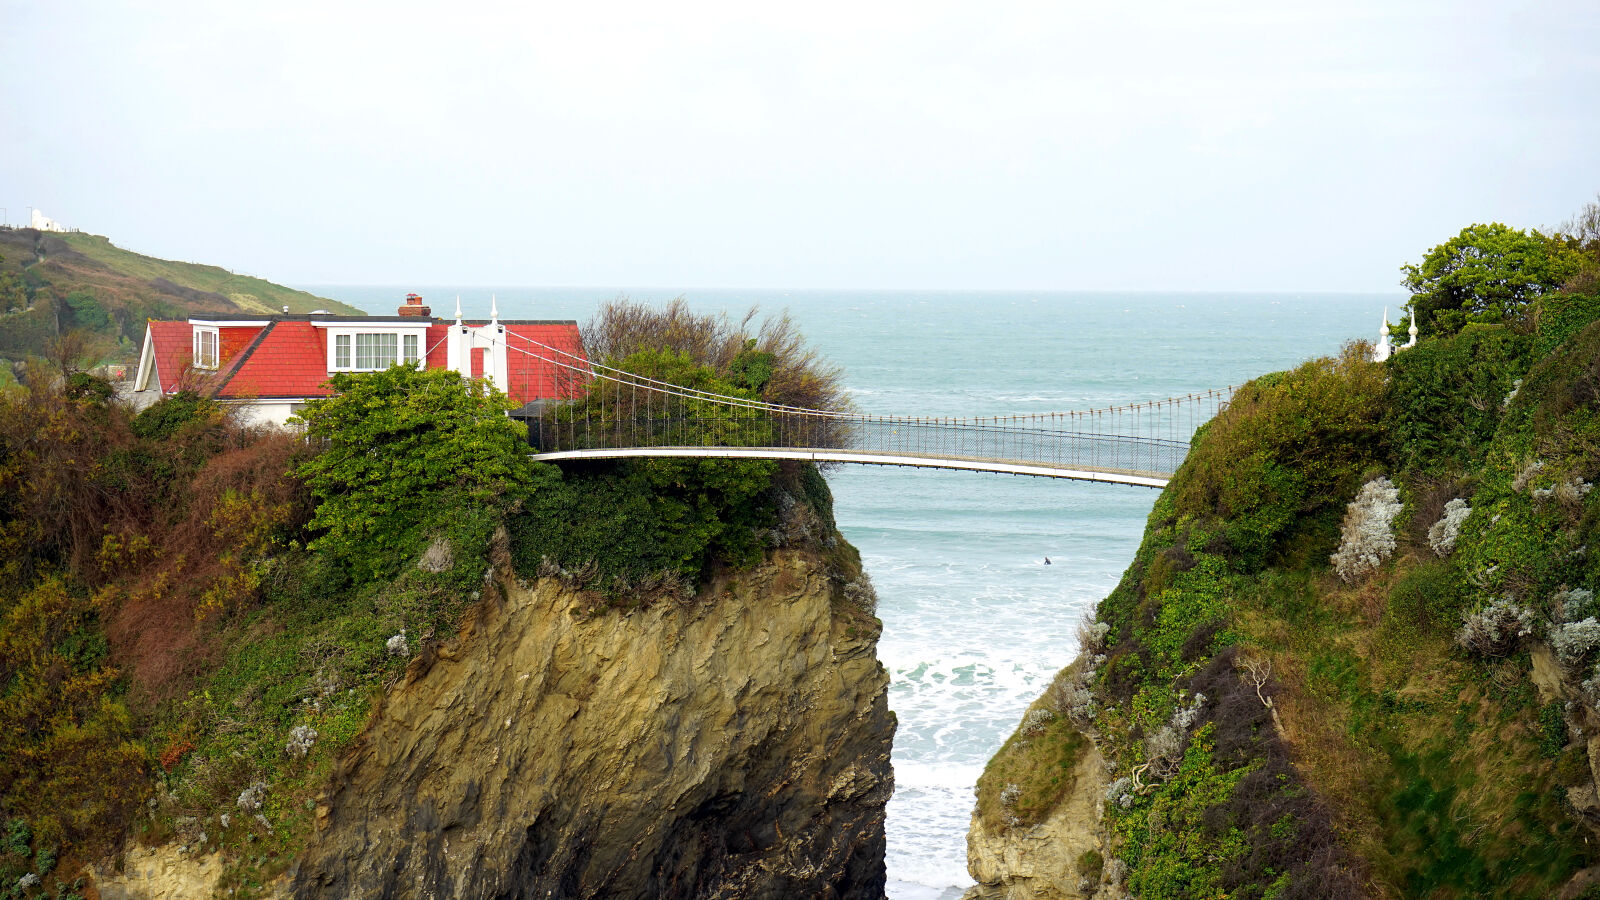 Sony a7 sample photo. Architecture, bridge, cliffs, countryside photography